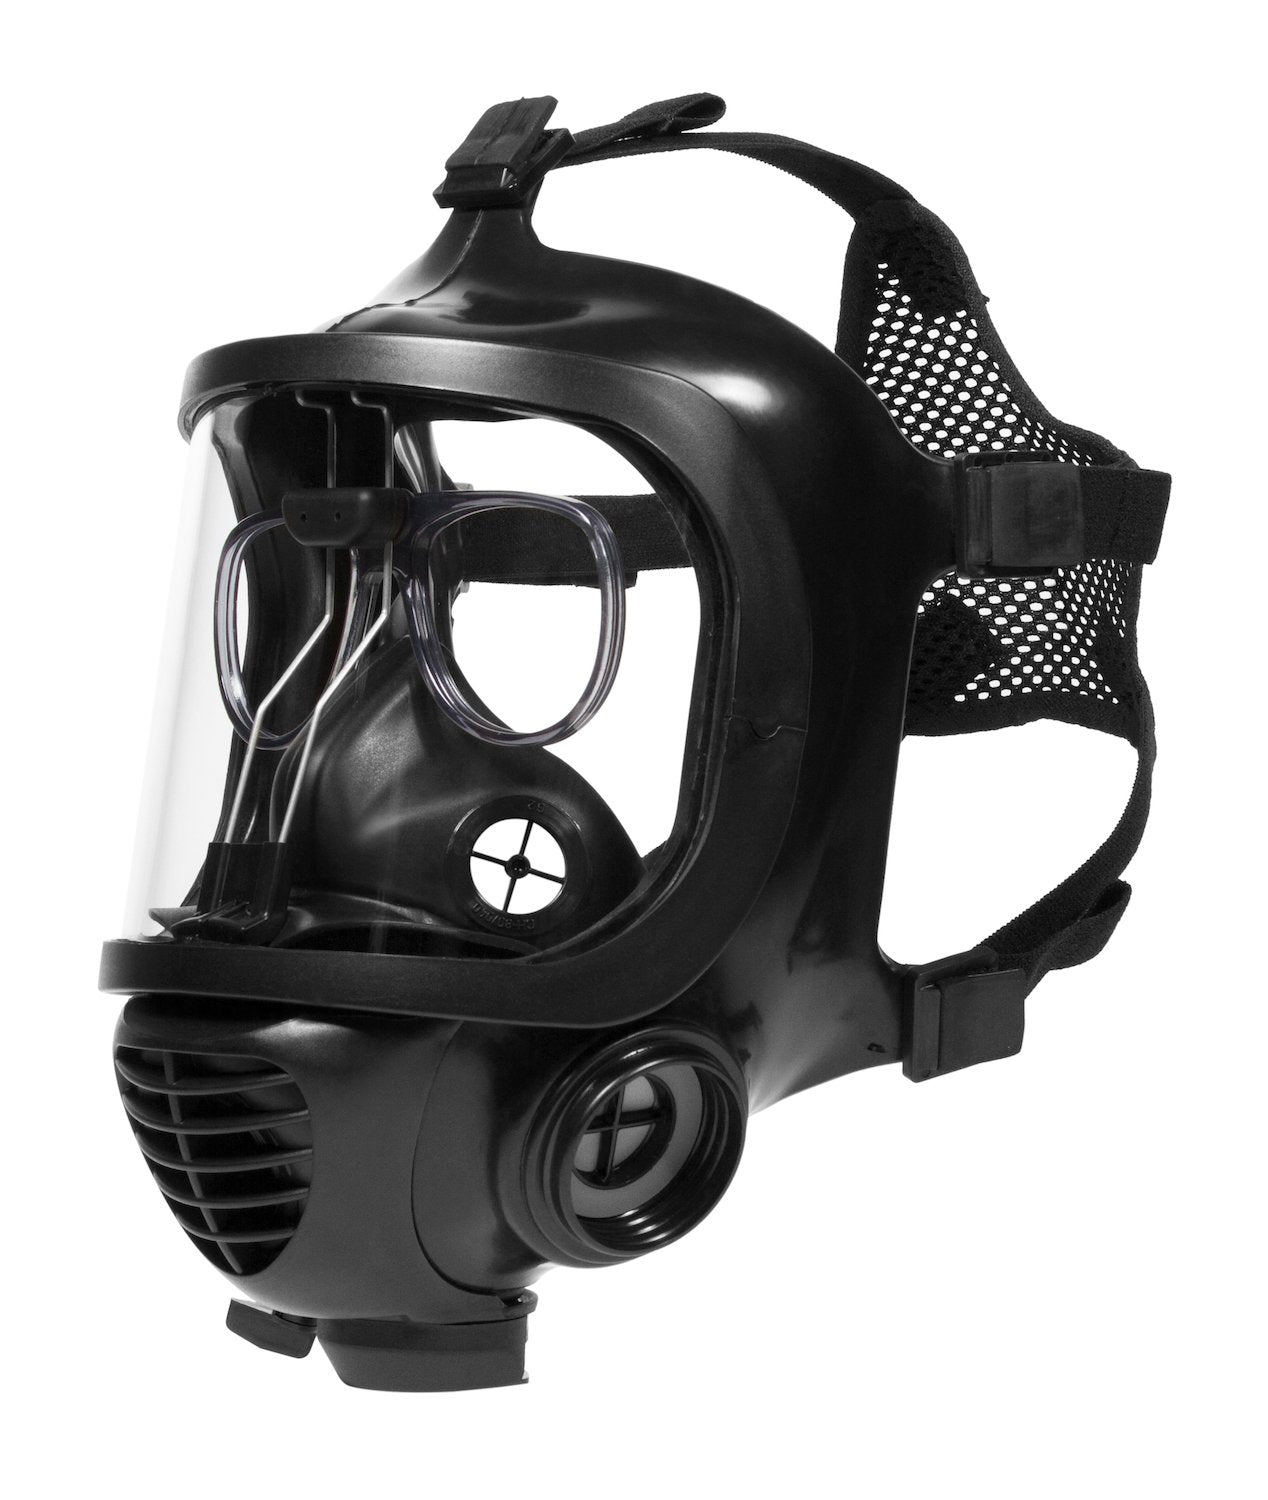 Three quarter view of CM-6M tactical gas mask with the 3M spectacle insert